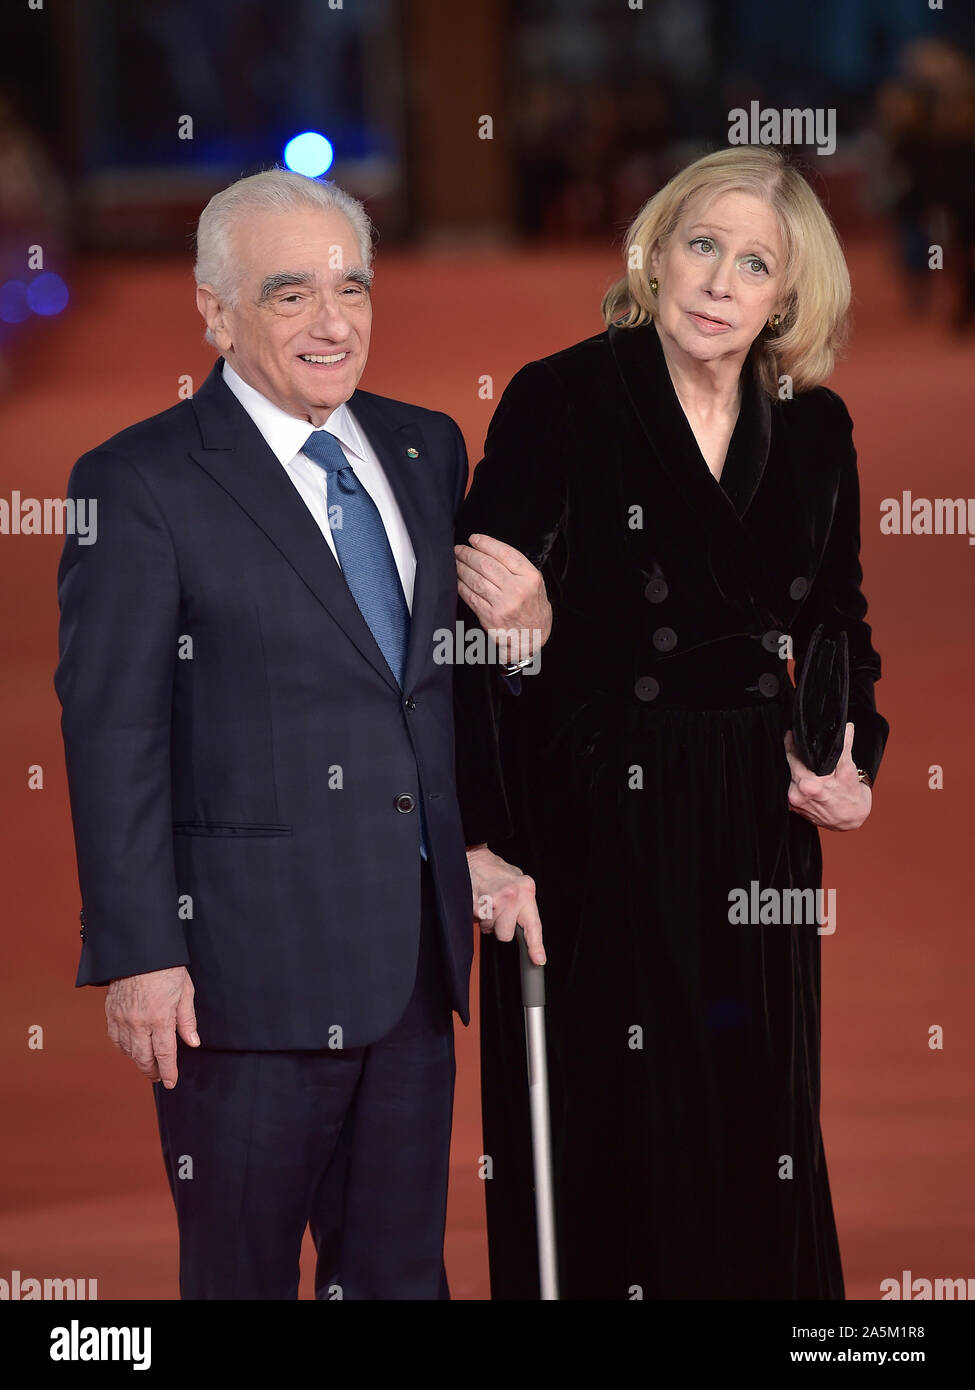 Italy, Rome, 21 October, 2019 : 14th Rome Film Festival Photocall of the movie 'The irishman'  Pictured: Martin Scorsese and wife Helen Morris    Phot Stock Photo